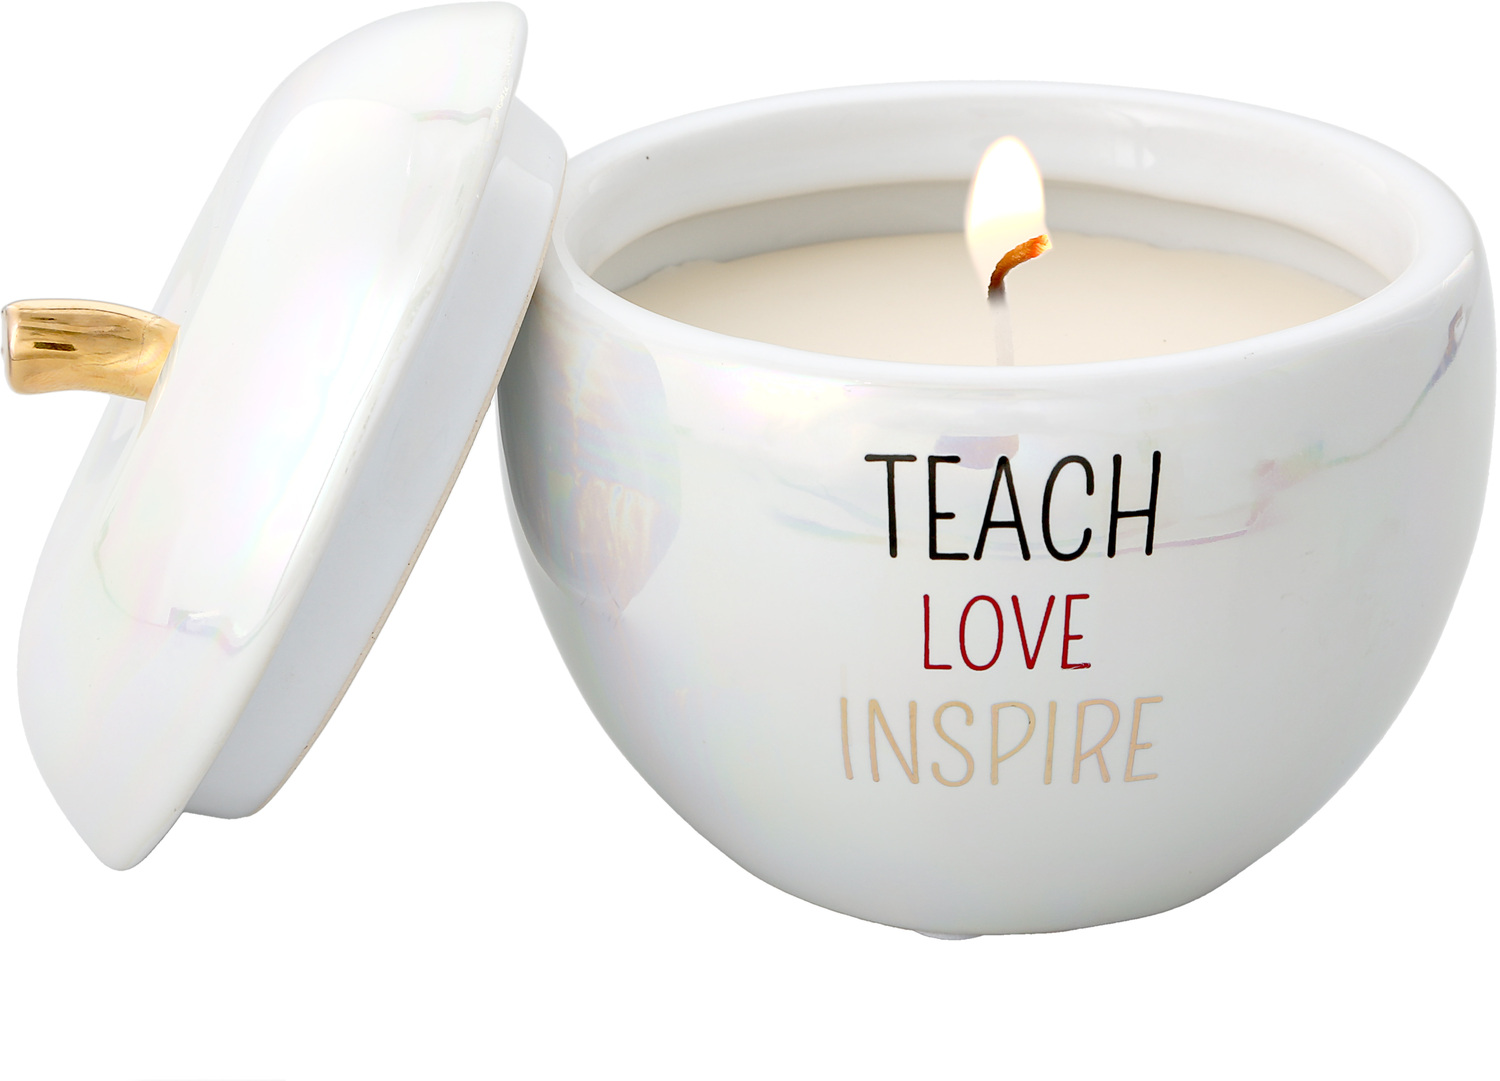 Teach Love Inspire by Teachable Moments - Teach Love Inspire - 8 oz. 100% Soy Wax Candle
Scent: Serenity